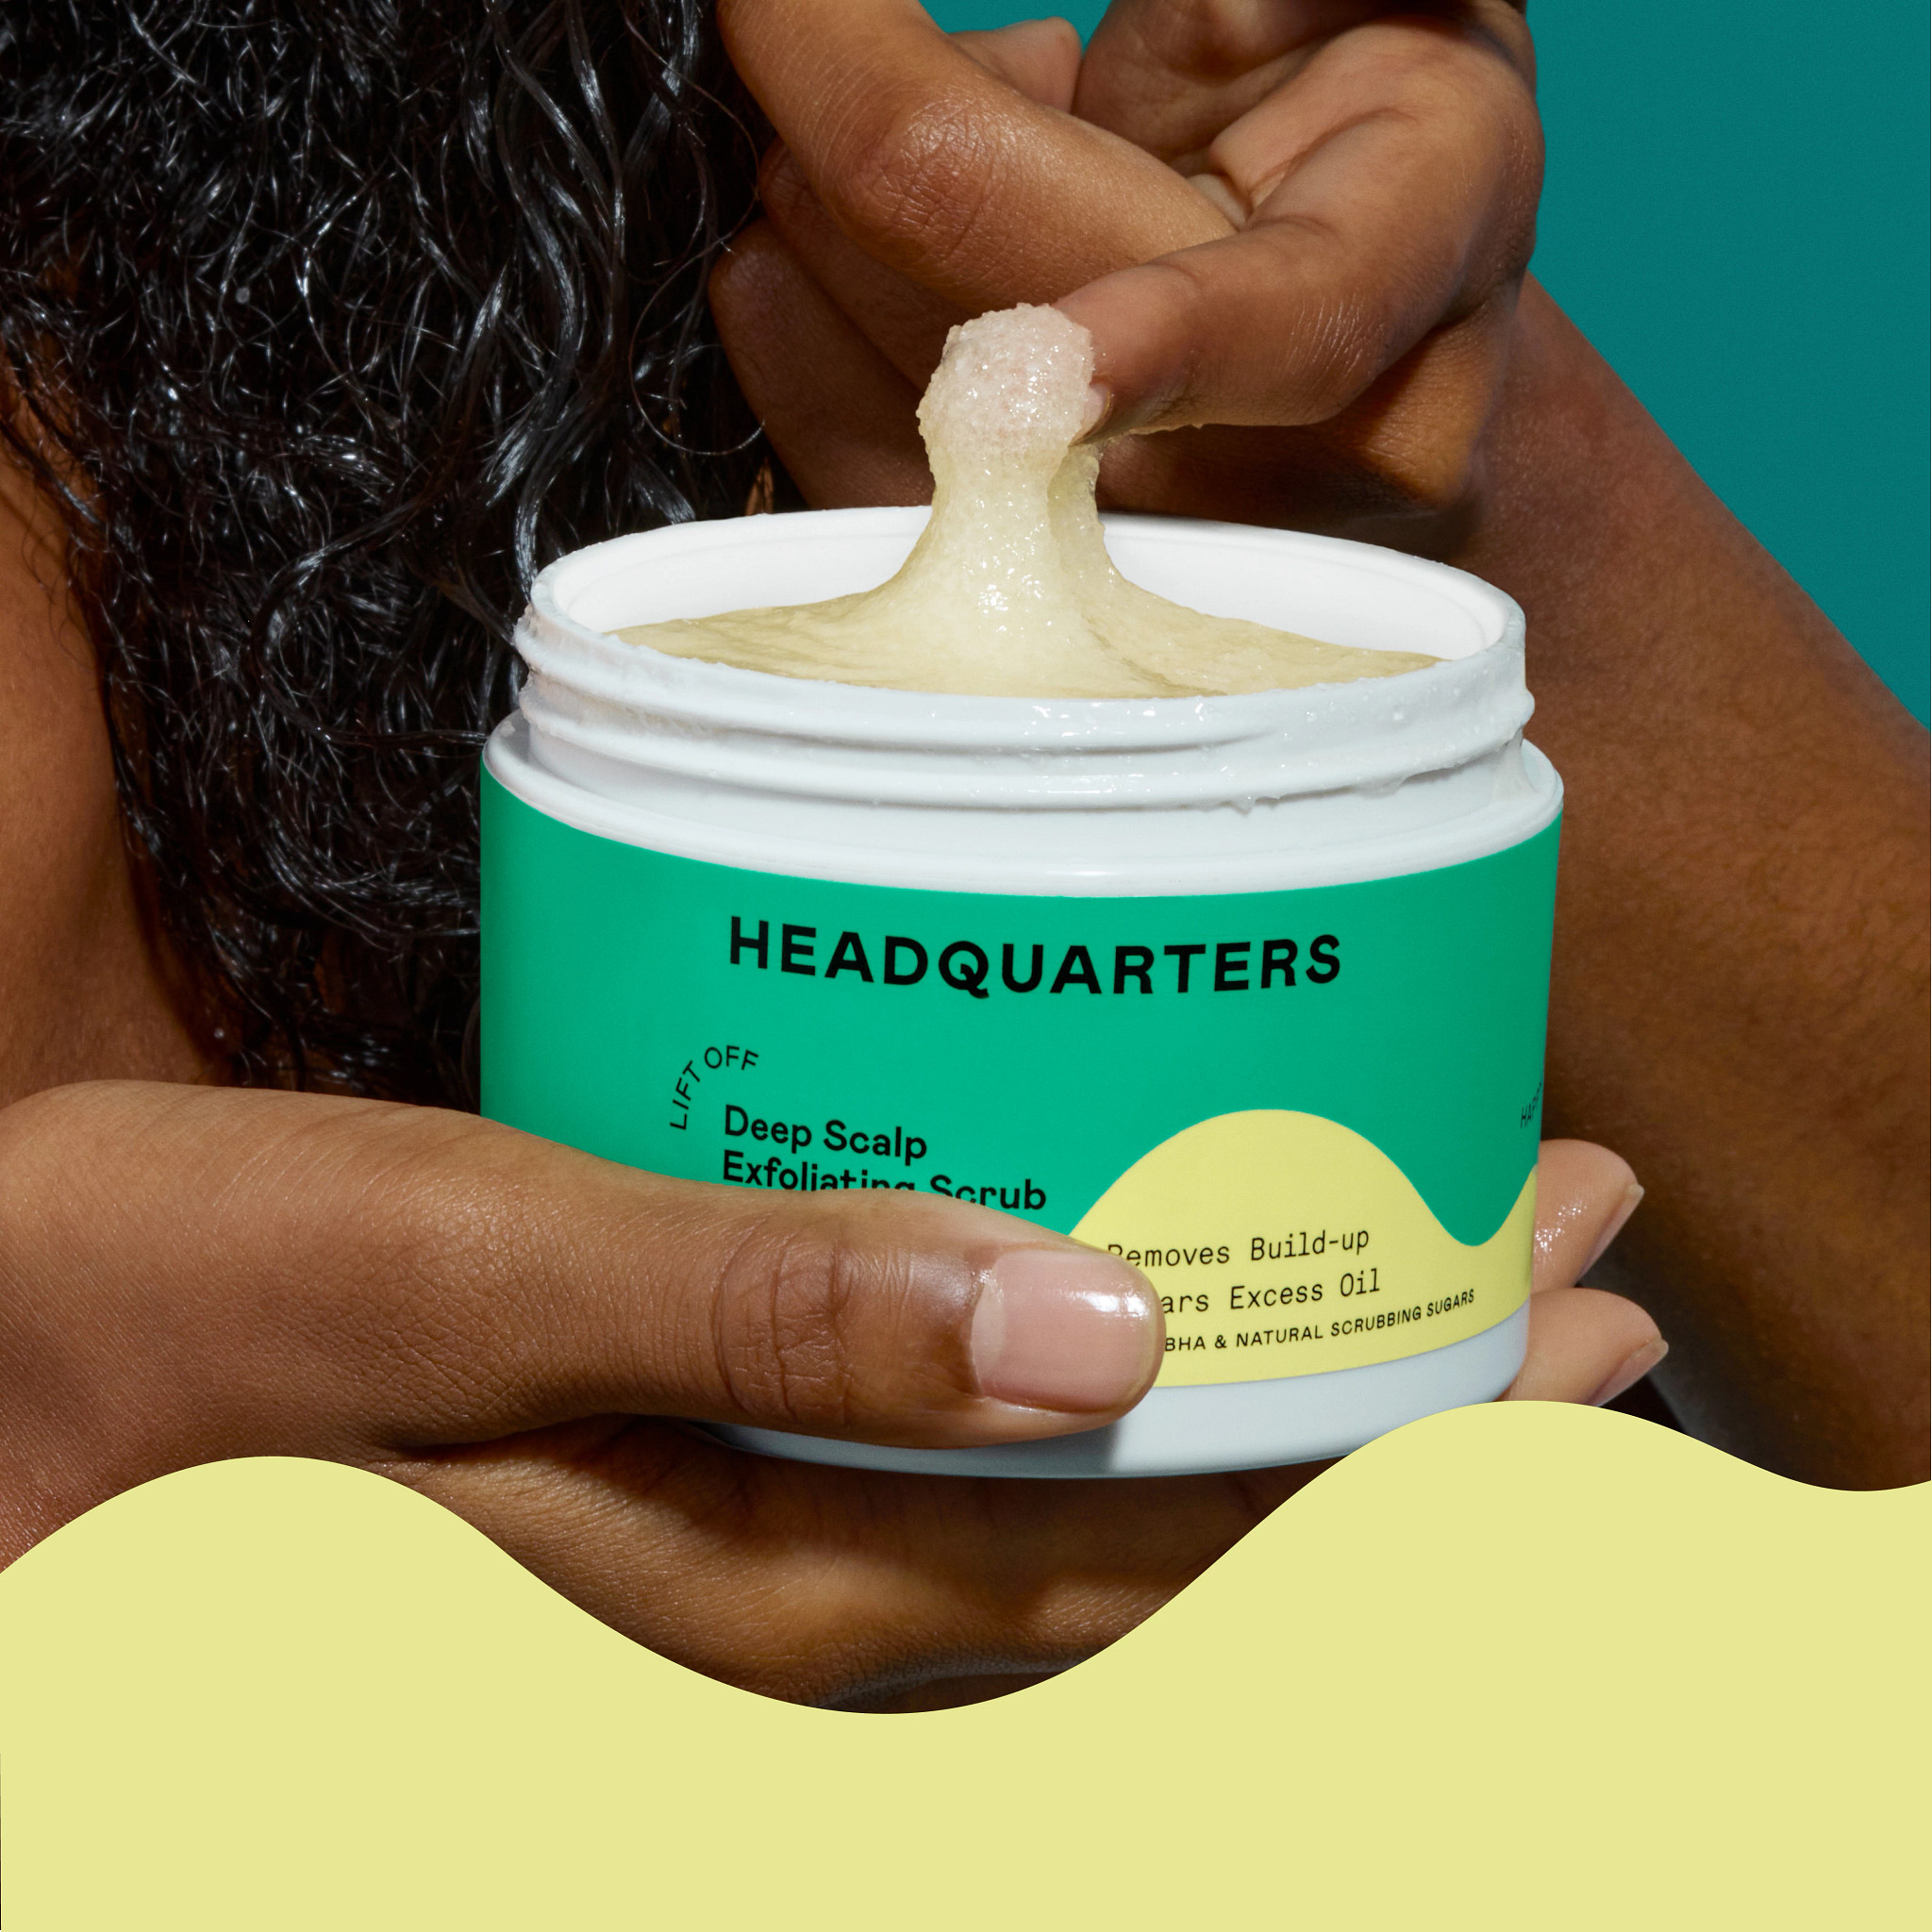 Headquarters Deep Scalp Exfoliating Scrub for Oily Scalp and Hair, Net wt 8 oz / 226.8 g - image 4 of 12